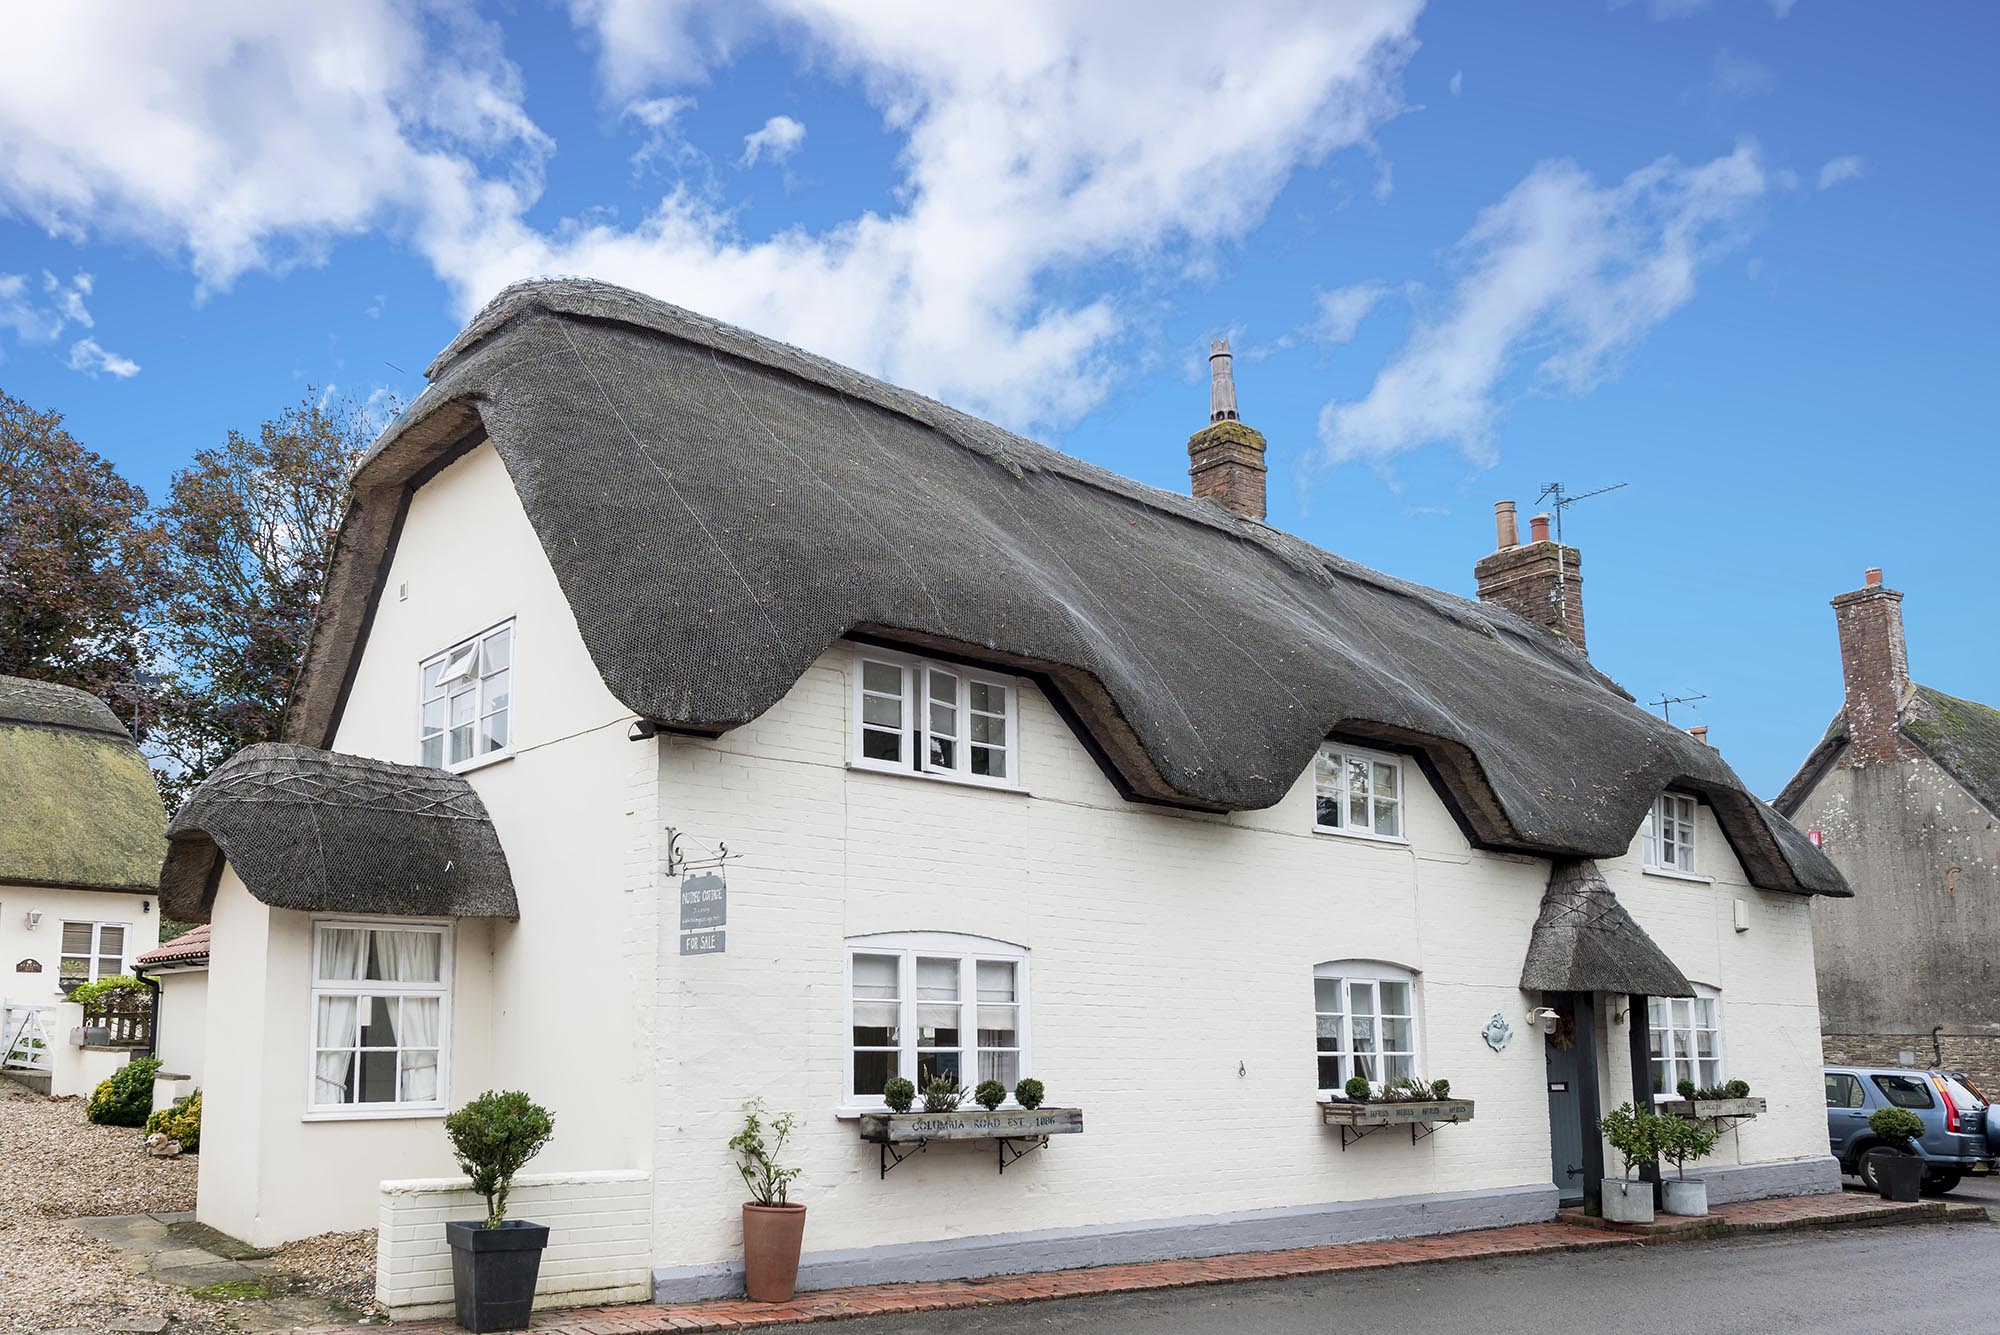 Nutmeg Cottage : Dreamy Dorset homes for sale now 